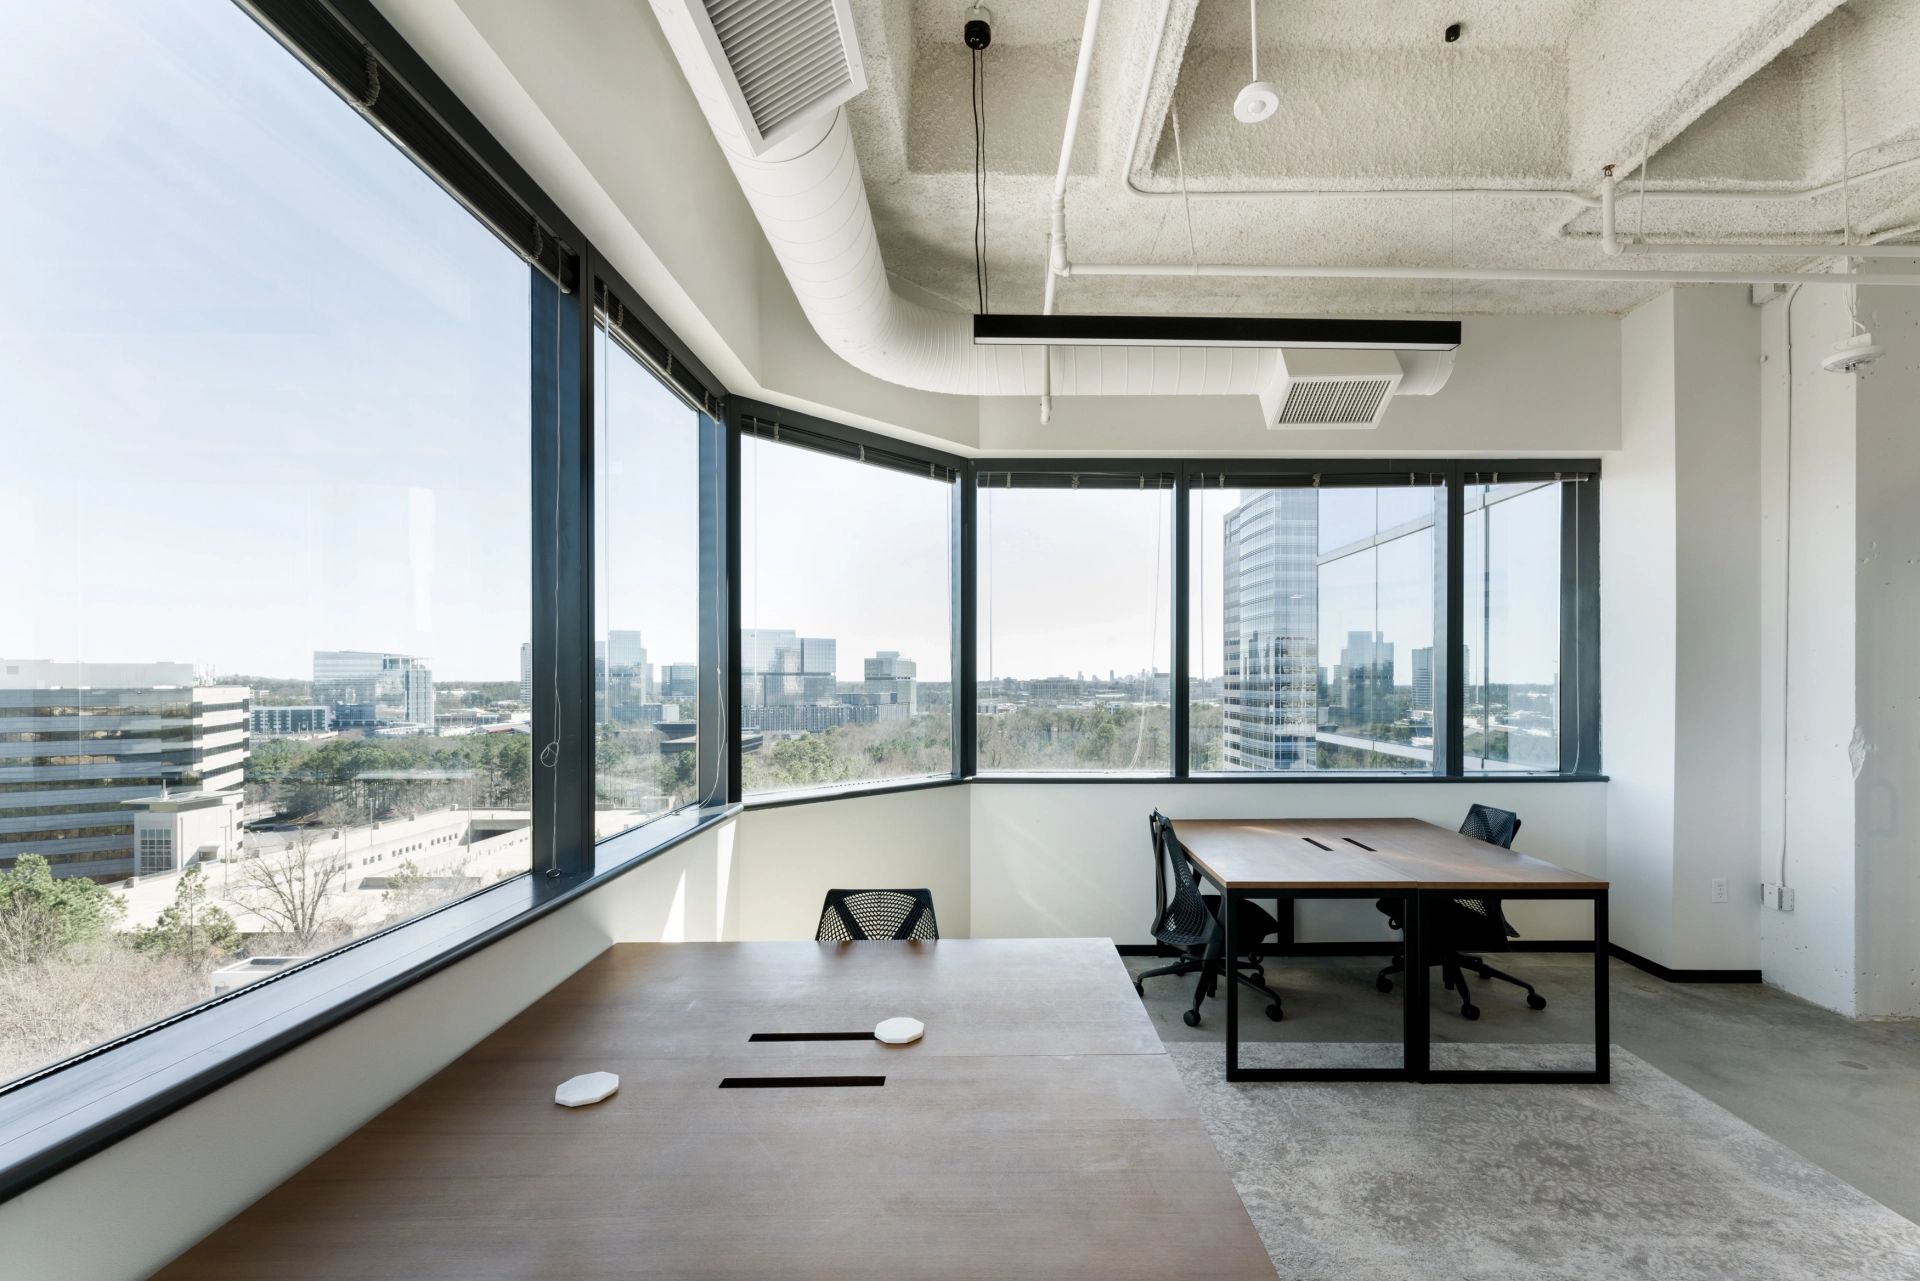 A coworking office in Atlanta with large windows overlooking the city.